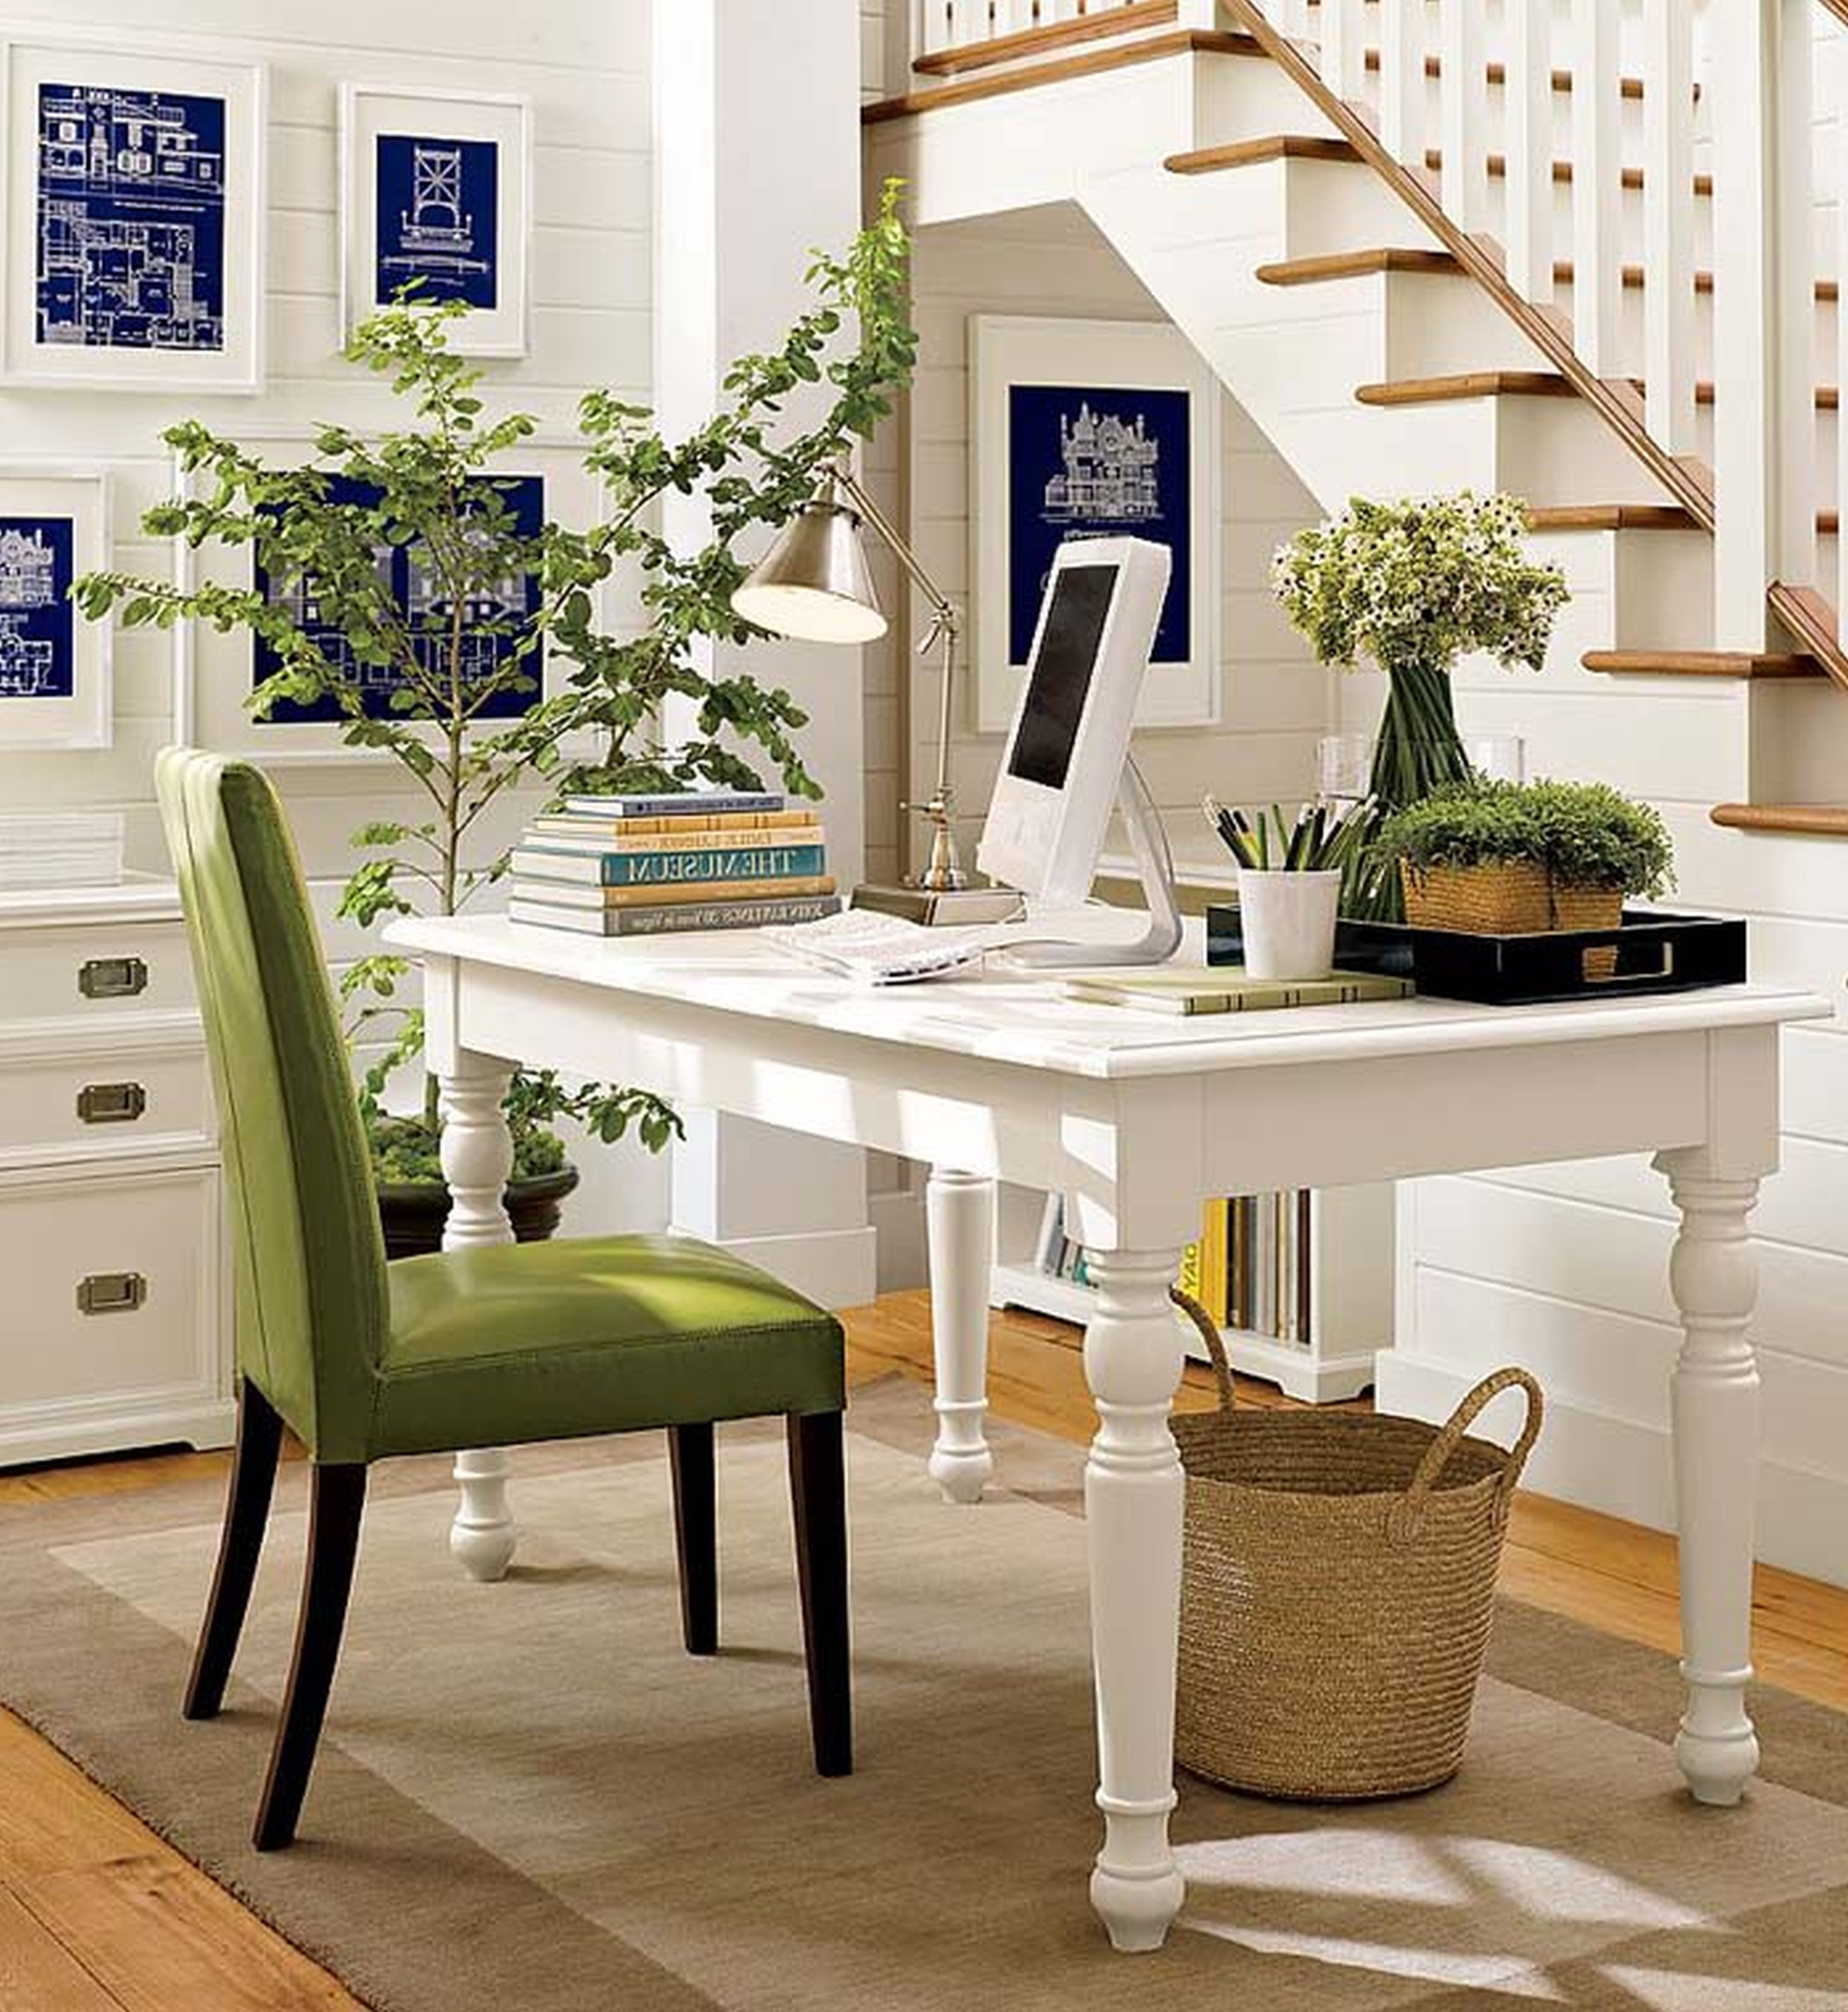 Eclectic Home Office Design Ideas